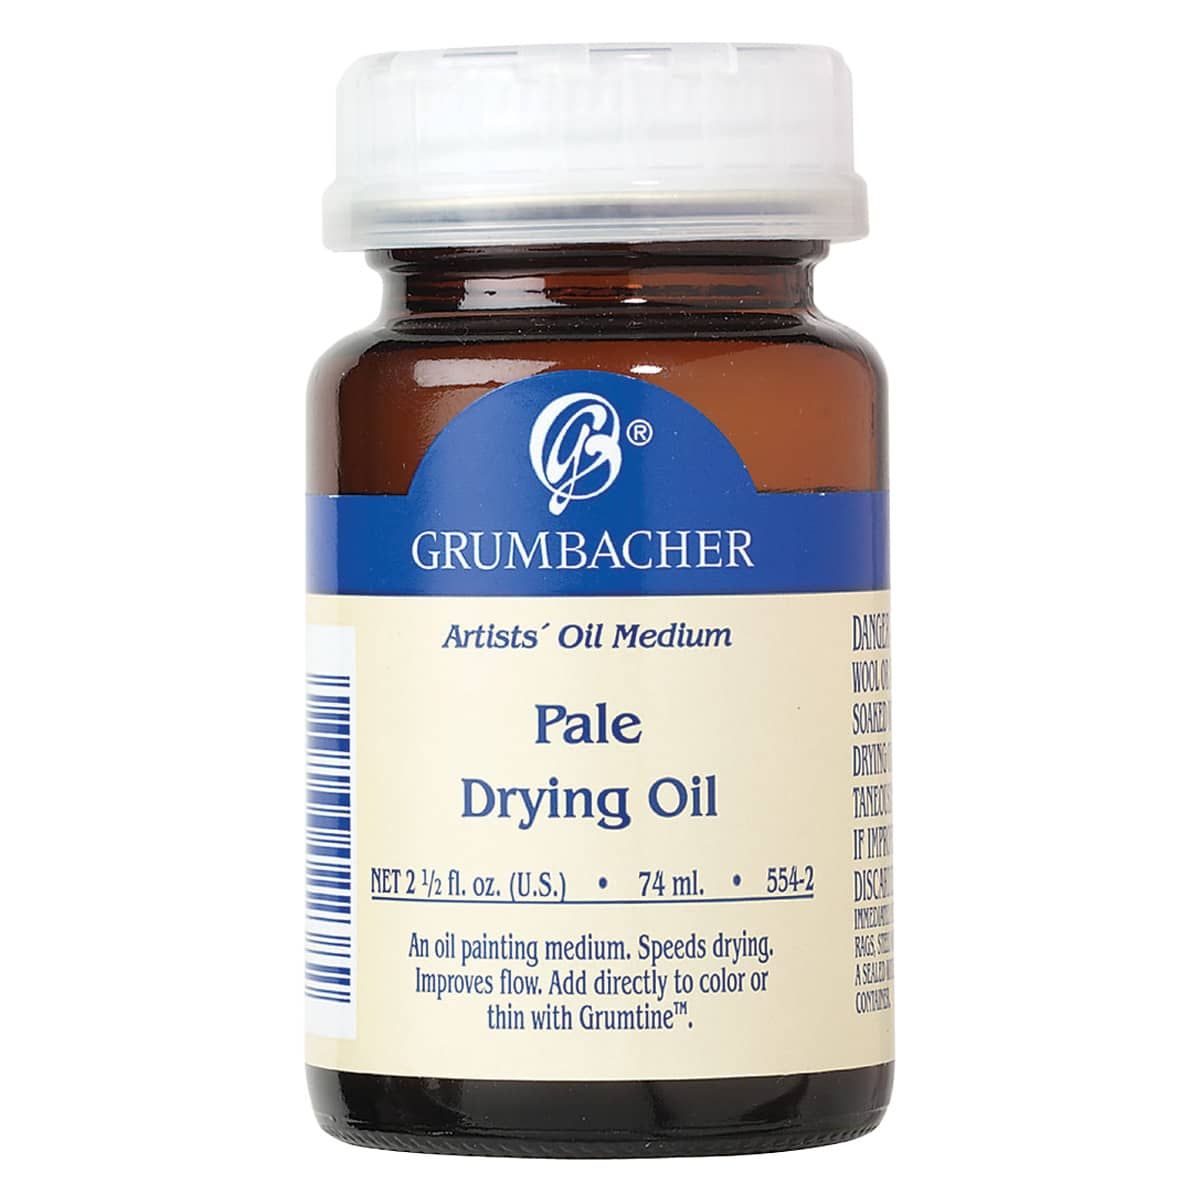 Grumbacher Pre-Tested Pale Drying Oil, 2.5 oz Bottle